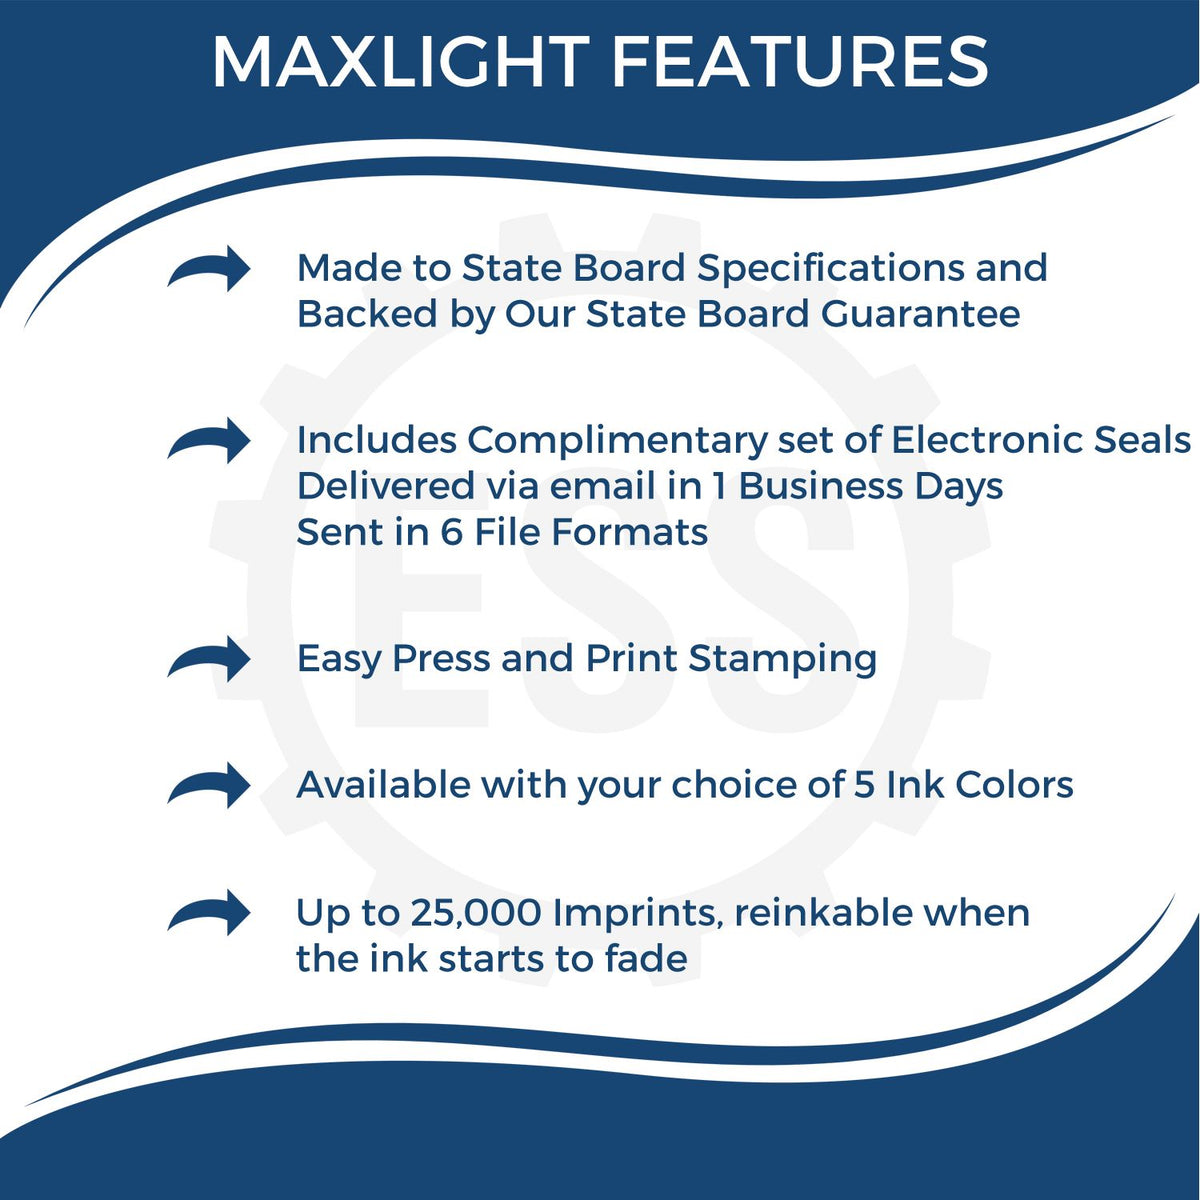 A picture of an infographic highlighting the selling points for the Premium MaxLight Pre-Inked Pennsylvania Landscape Architectural Stamp